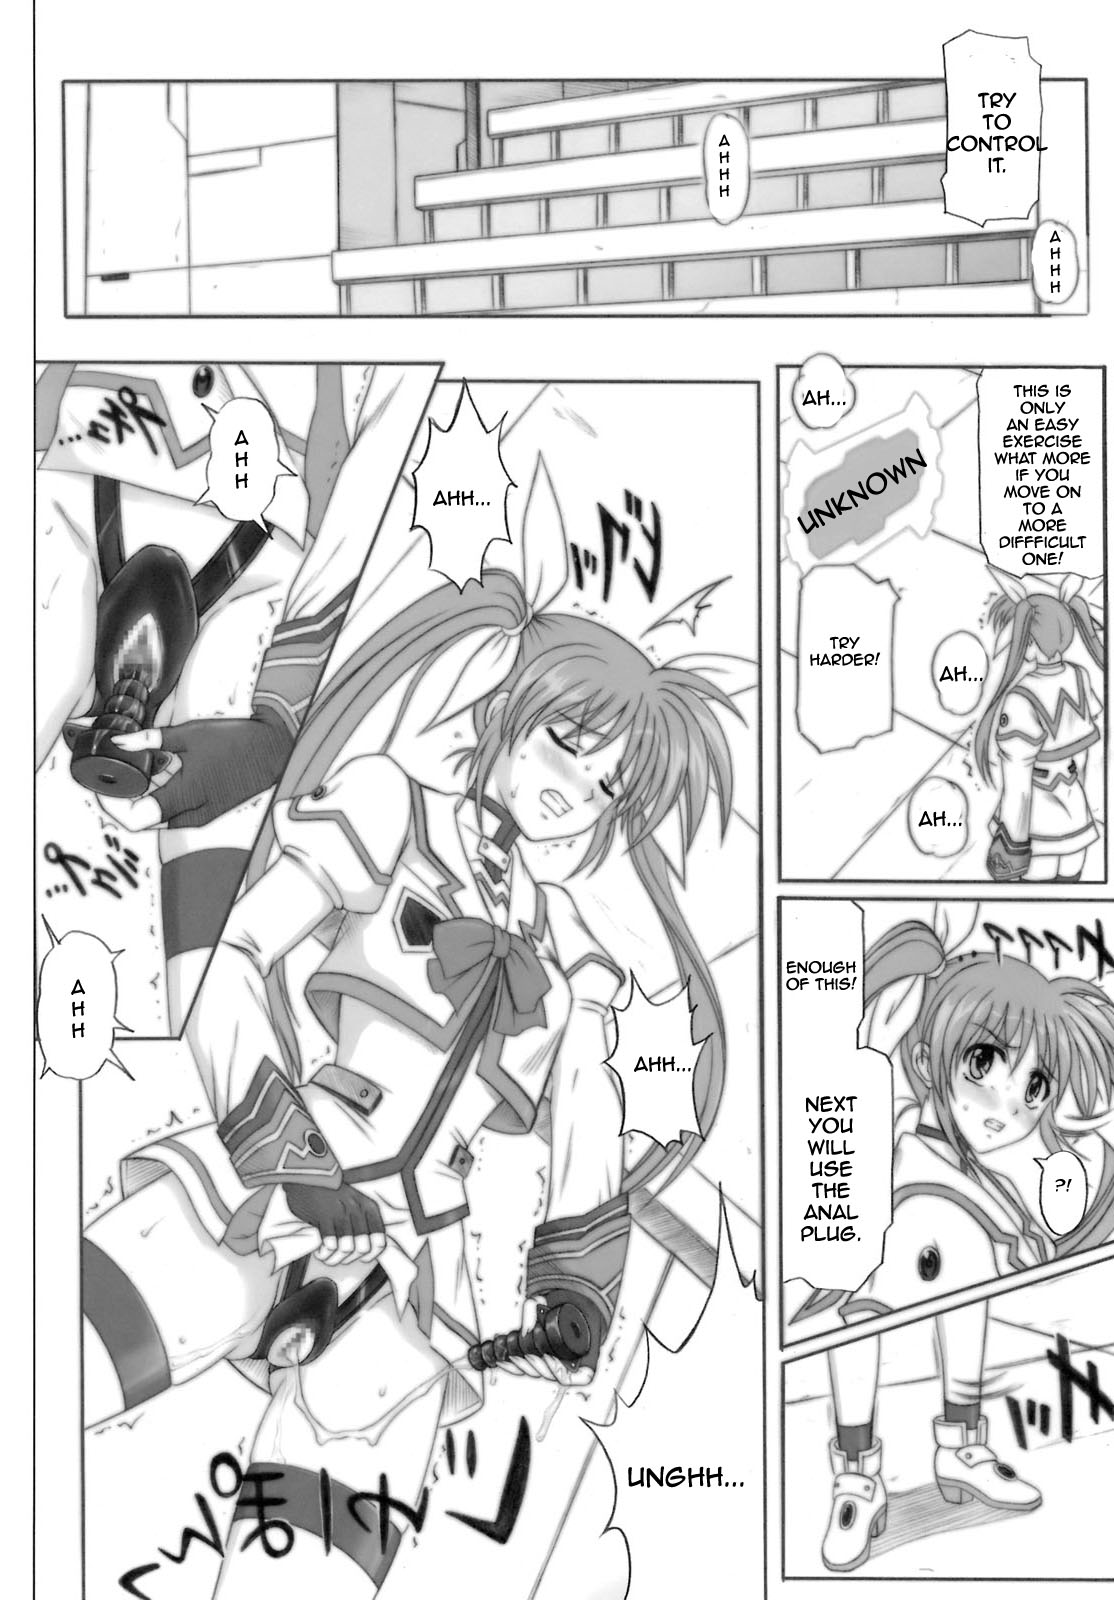 840 Color Classic Situation Note Extention (Mahou Shoujo Lyrical Nanoha) [English] [Rewrite] page 4 full